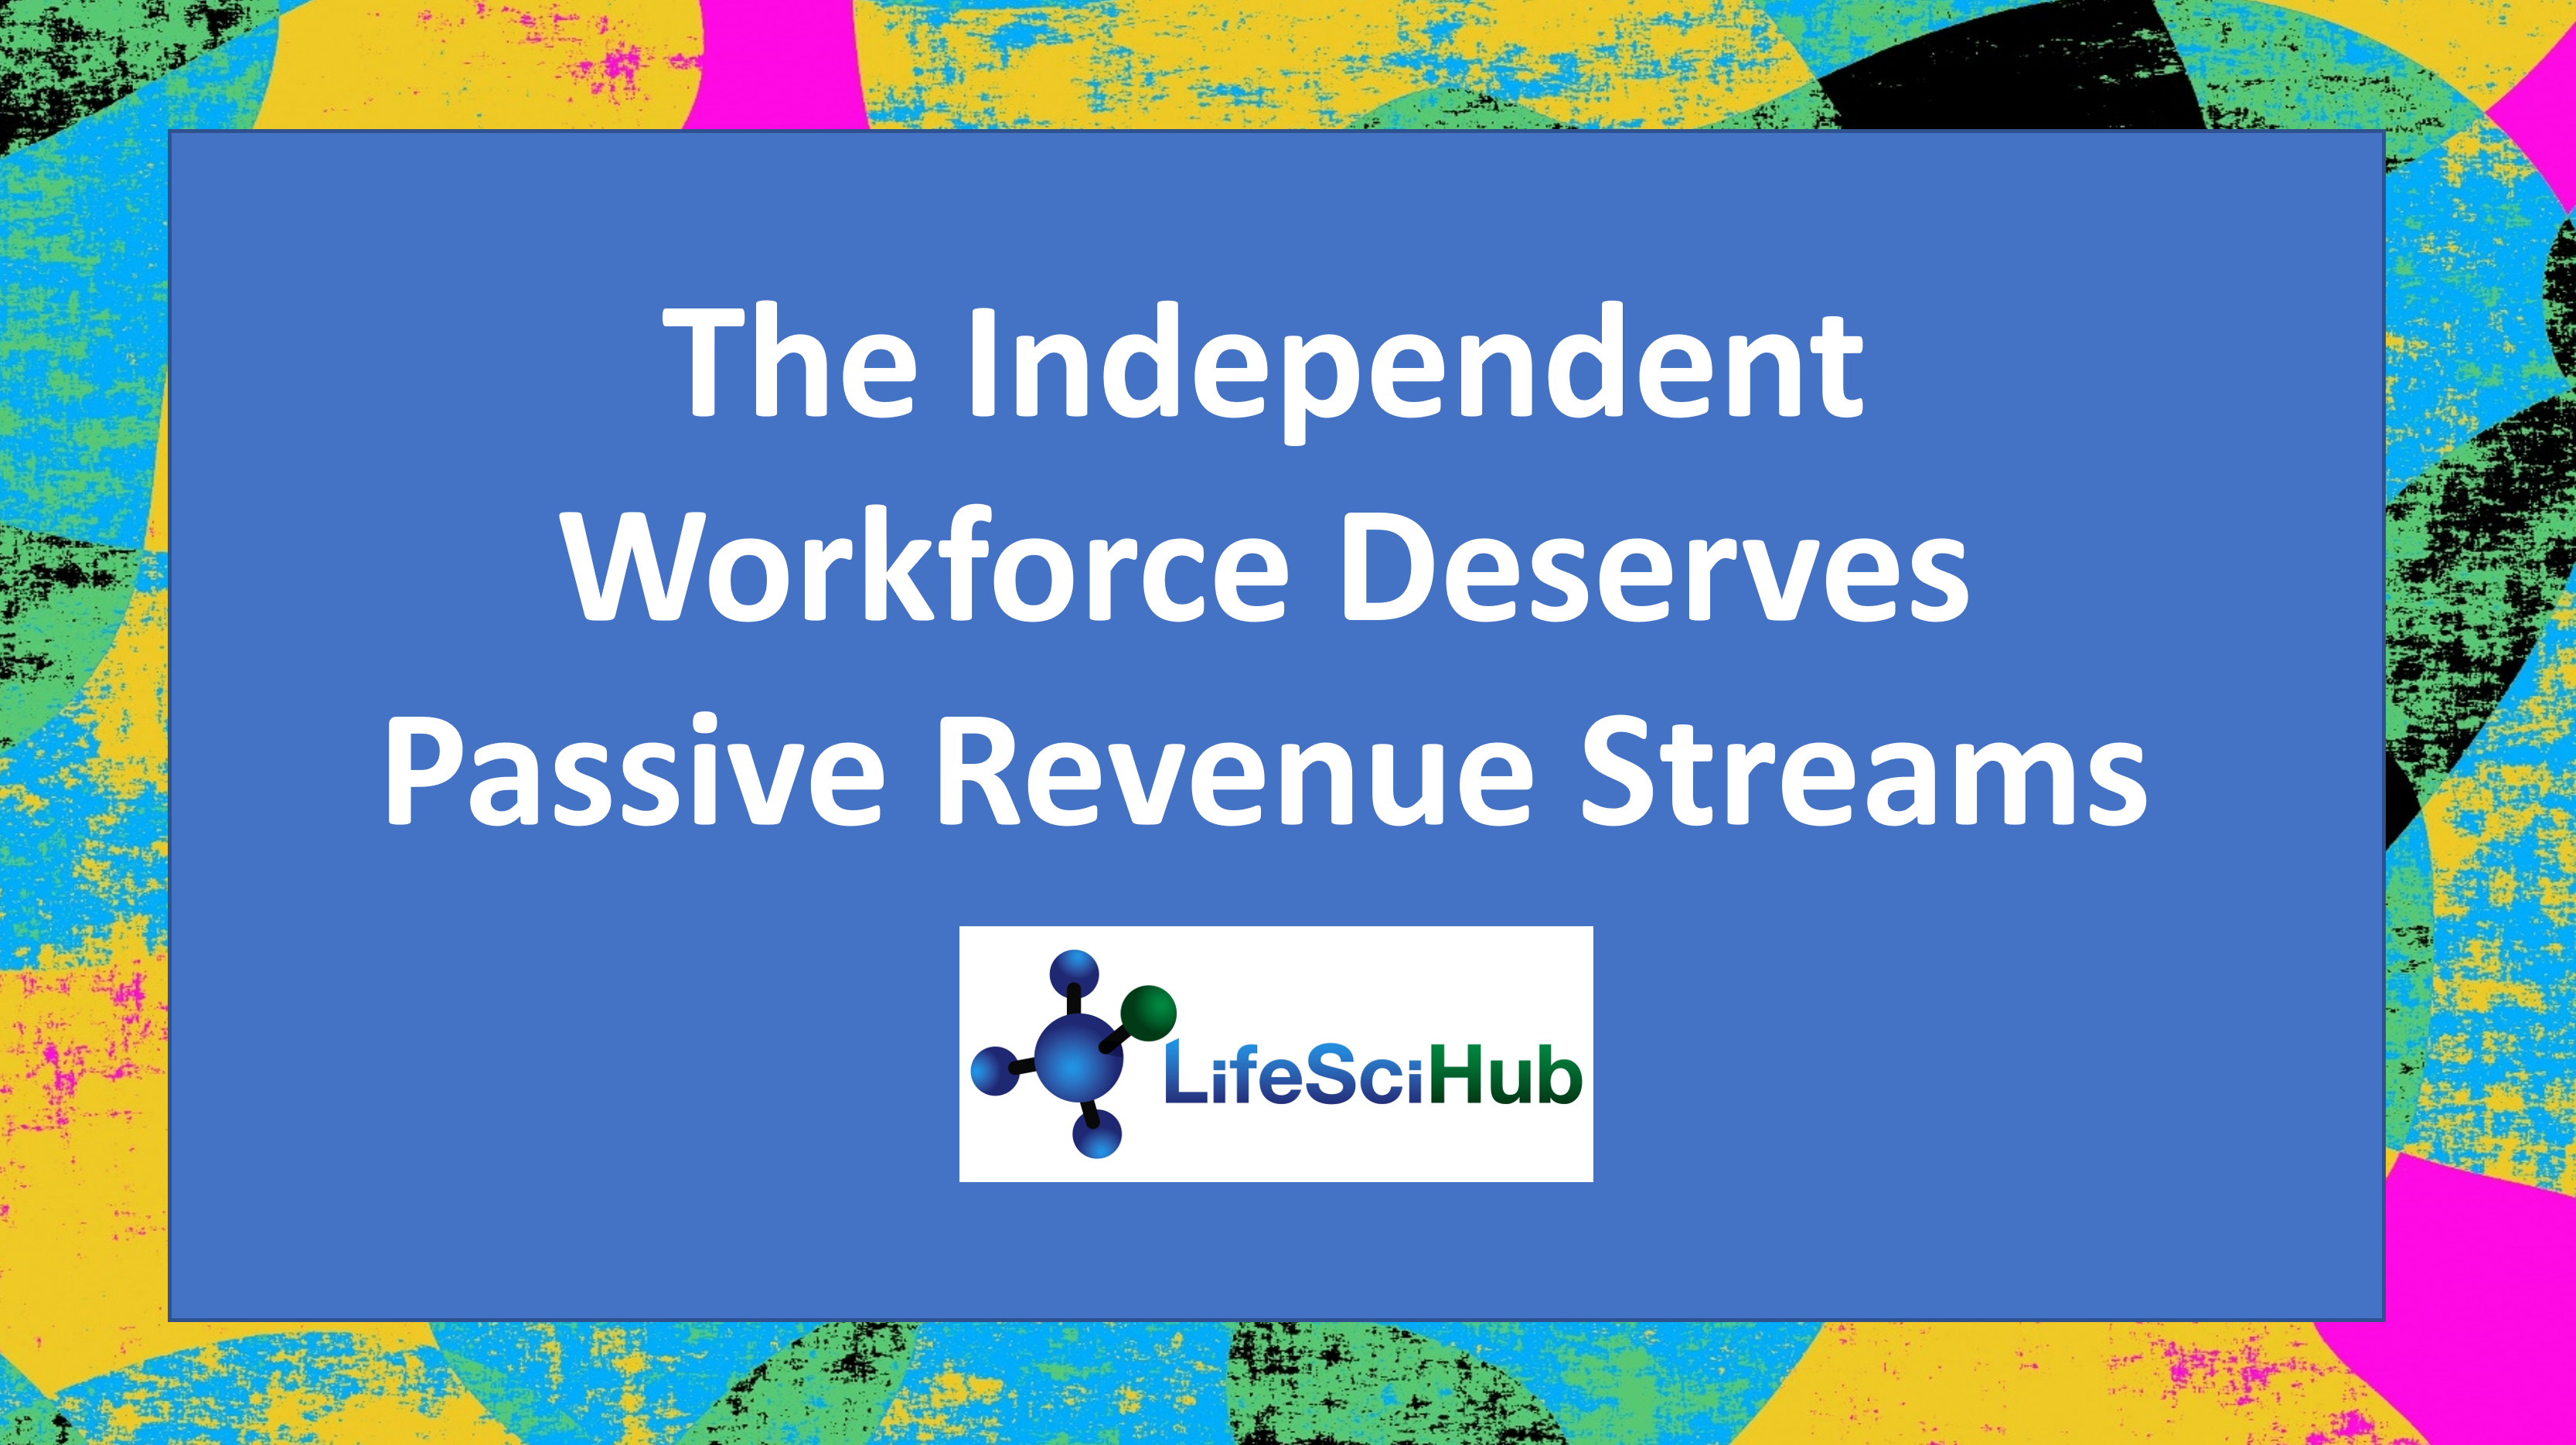 Small Independent Experts Deserve Passive Revenue Streams